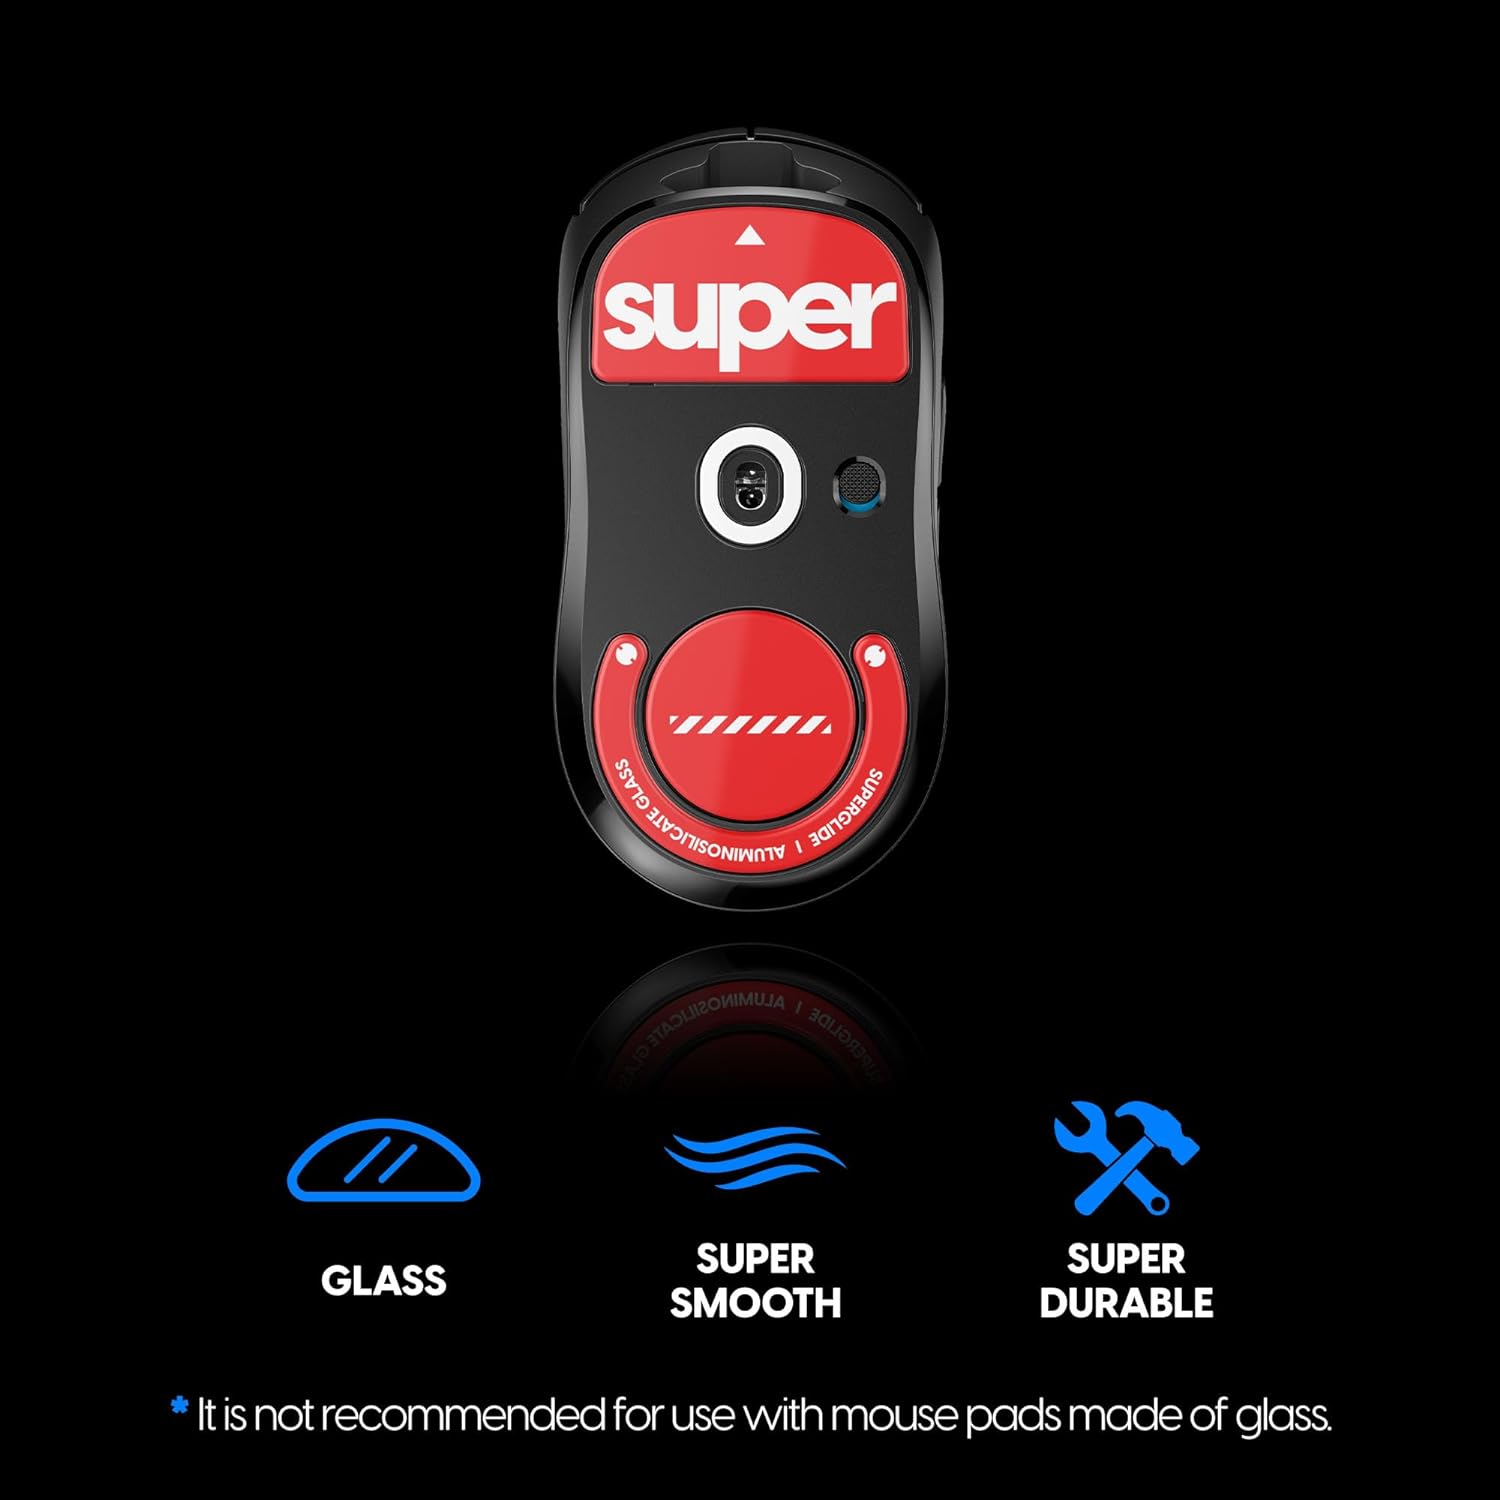 A large marketing image providing additional information about the product Pulsar Superglide 2 Mouse Skate for Logitech G Pro X Superlight - Red - Additional alt info not provided